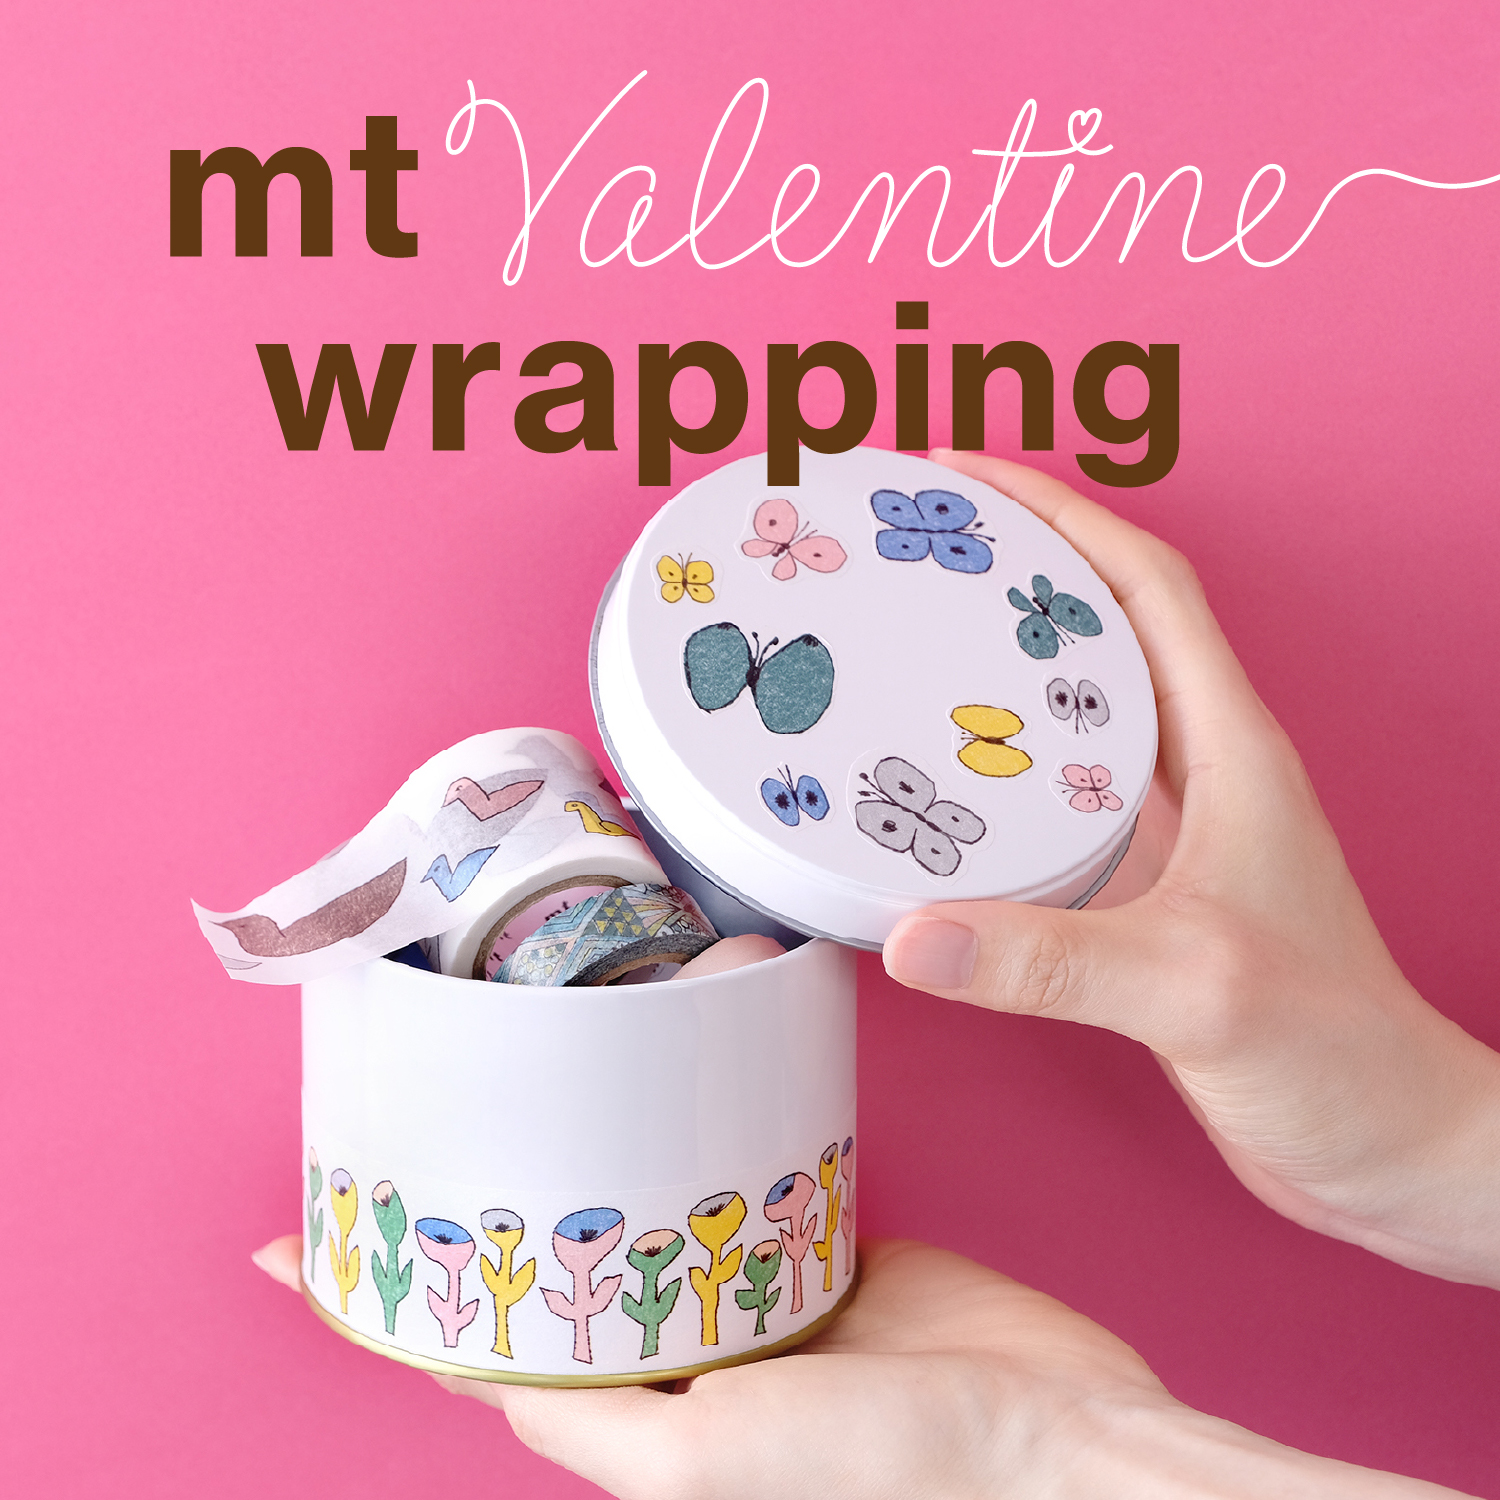 mt valentien wrapping 